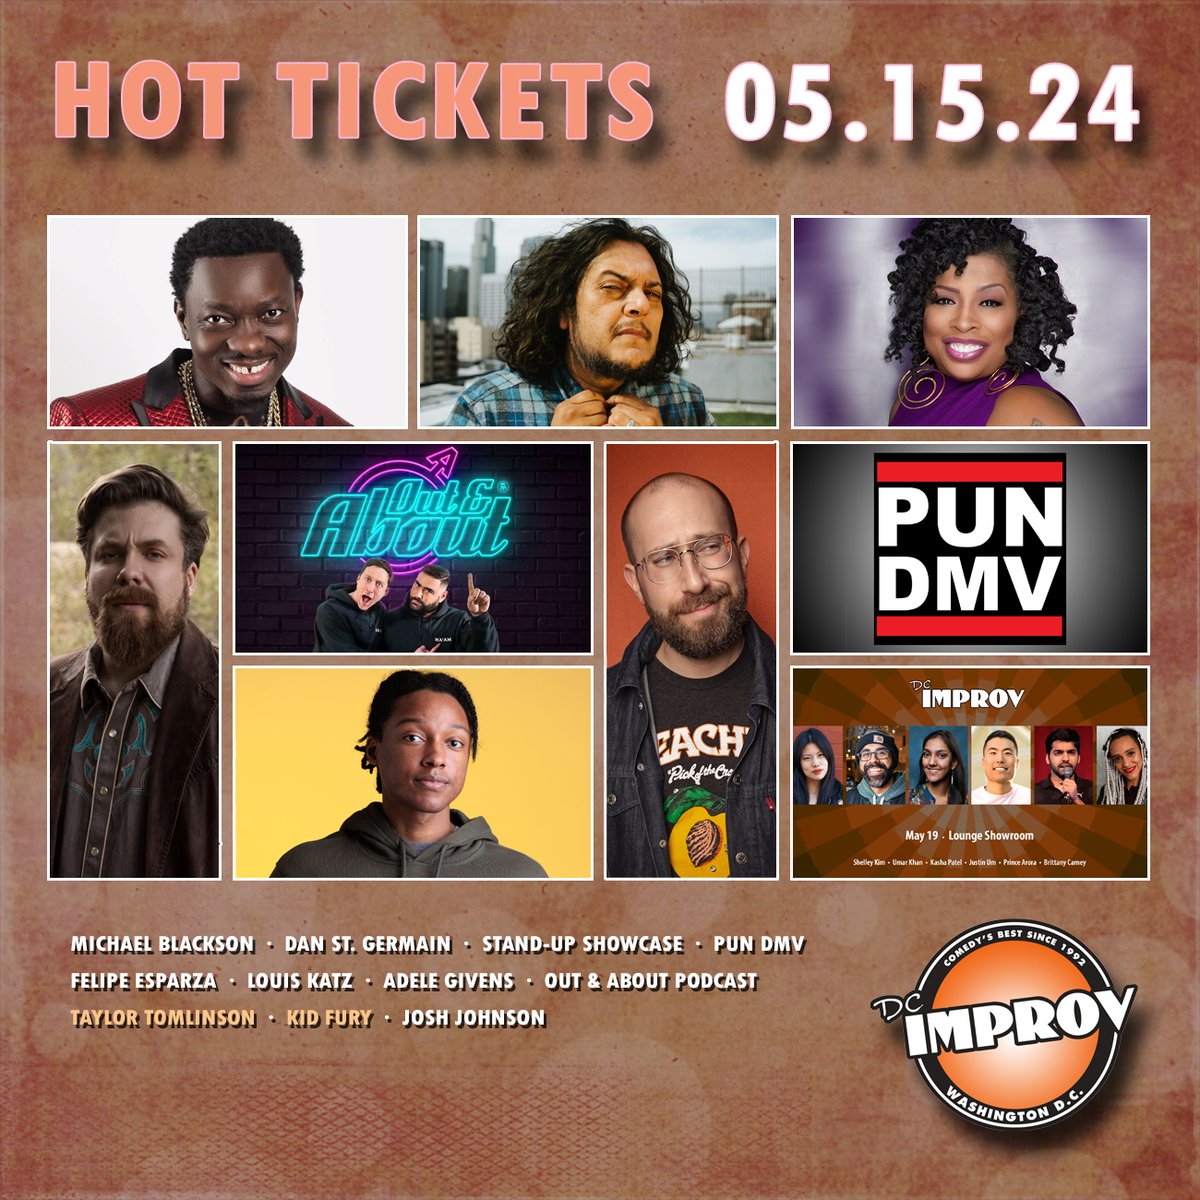 Your weekly hot ticket report is here! Best to clock out and spend the rest of the day thinking about it. Your boss will understand dcimprov.com/hot-tickets